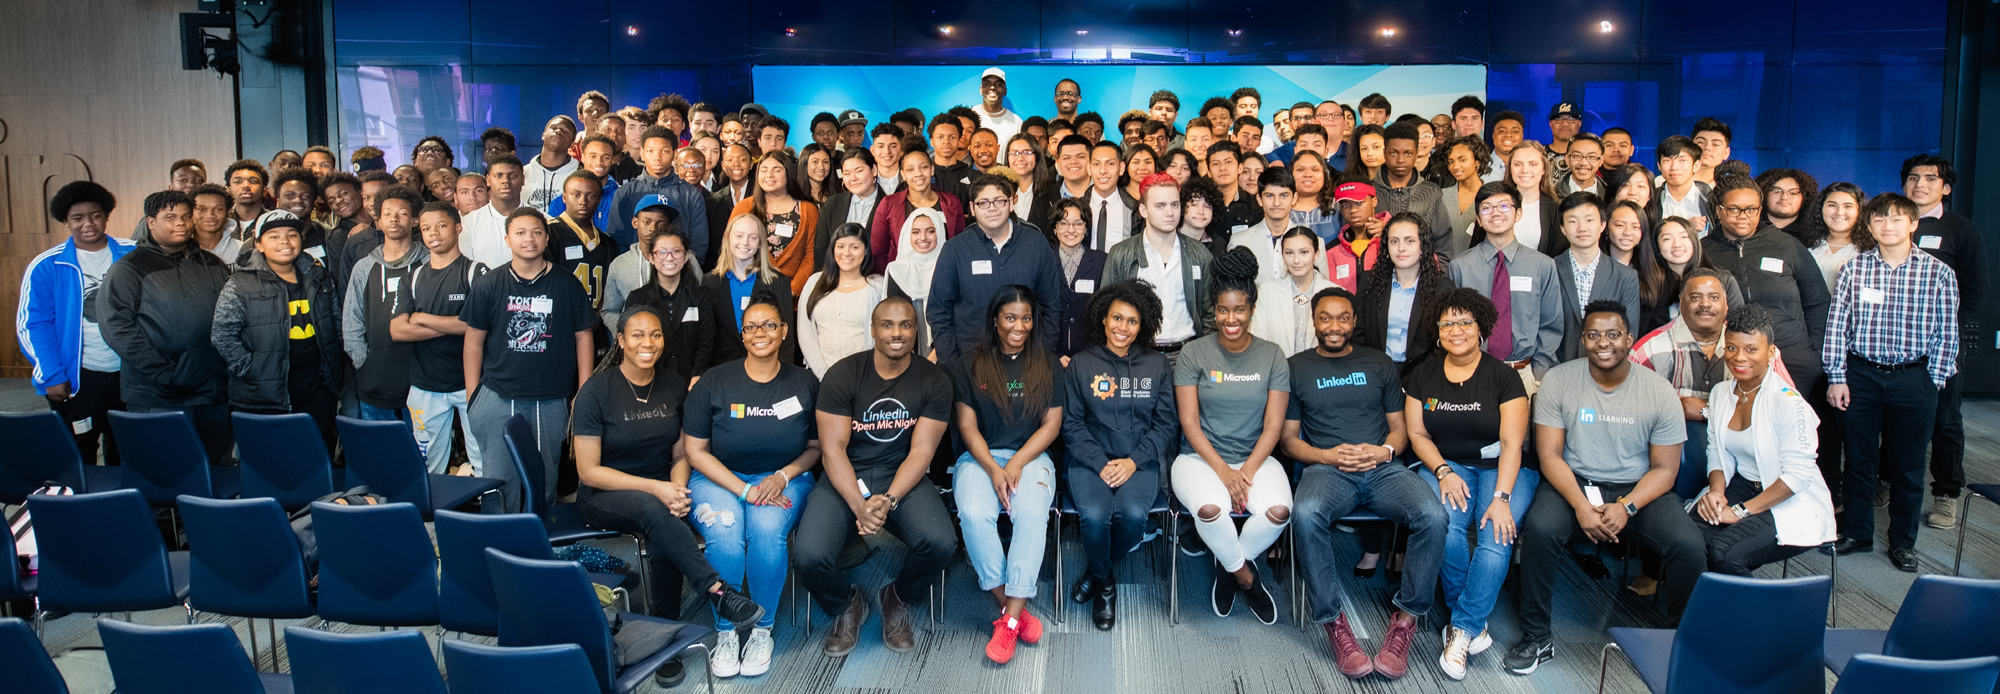 Microsoft's BAM and LinkedIn's BIG pose with more than 200 Bay Area students on Minority Student Day 2018